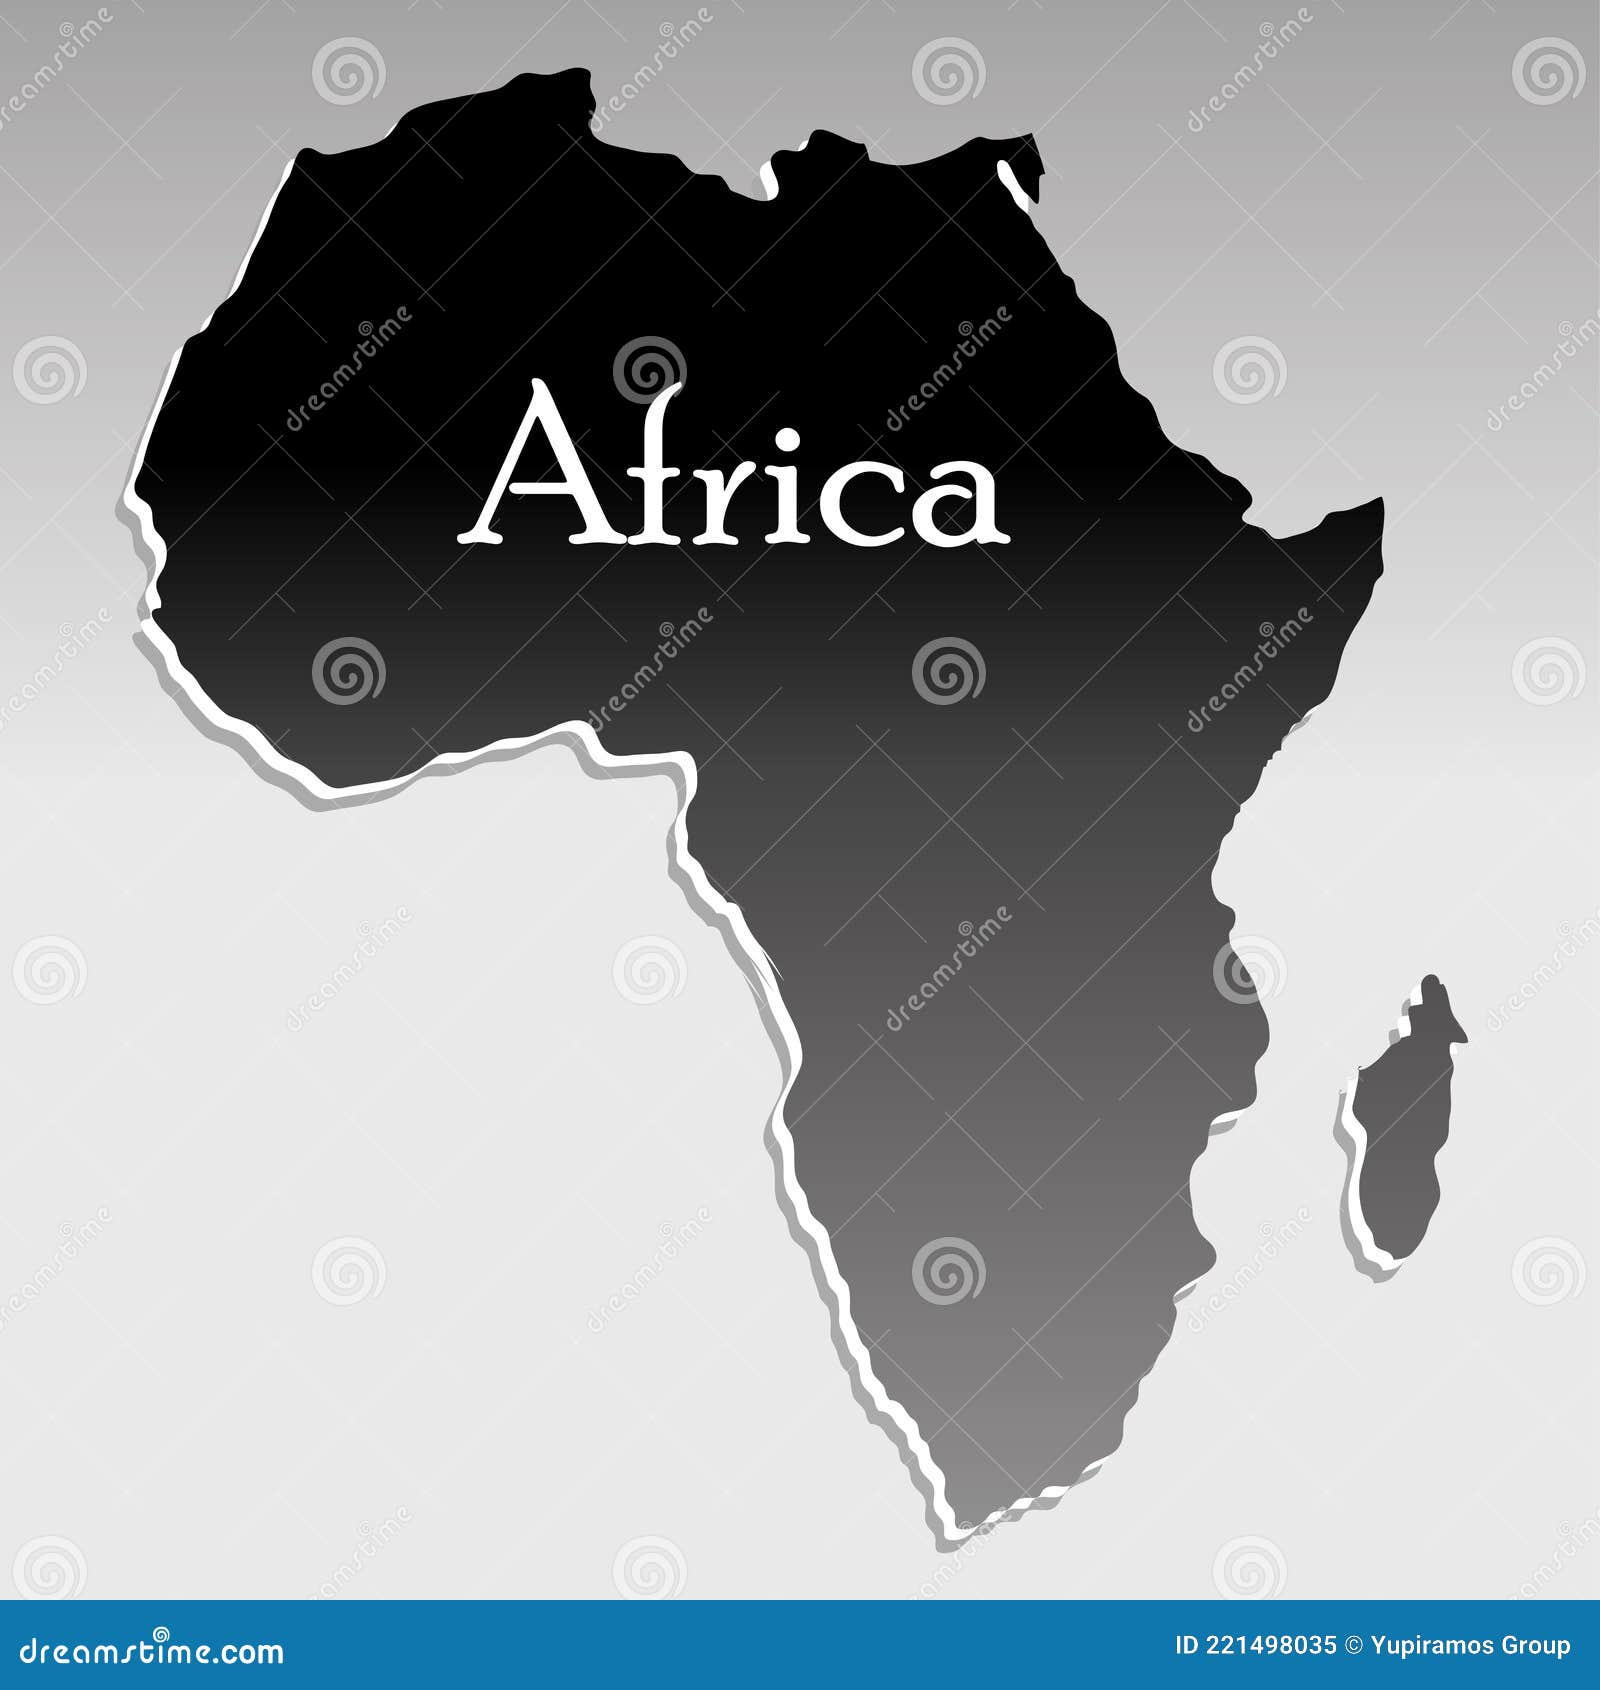 Map Africa Silhouette Stock Vector Illustration Of Africa 221498035